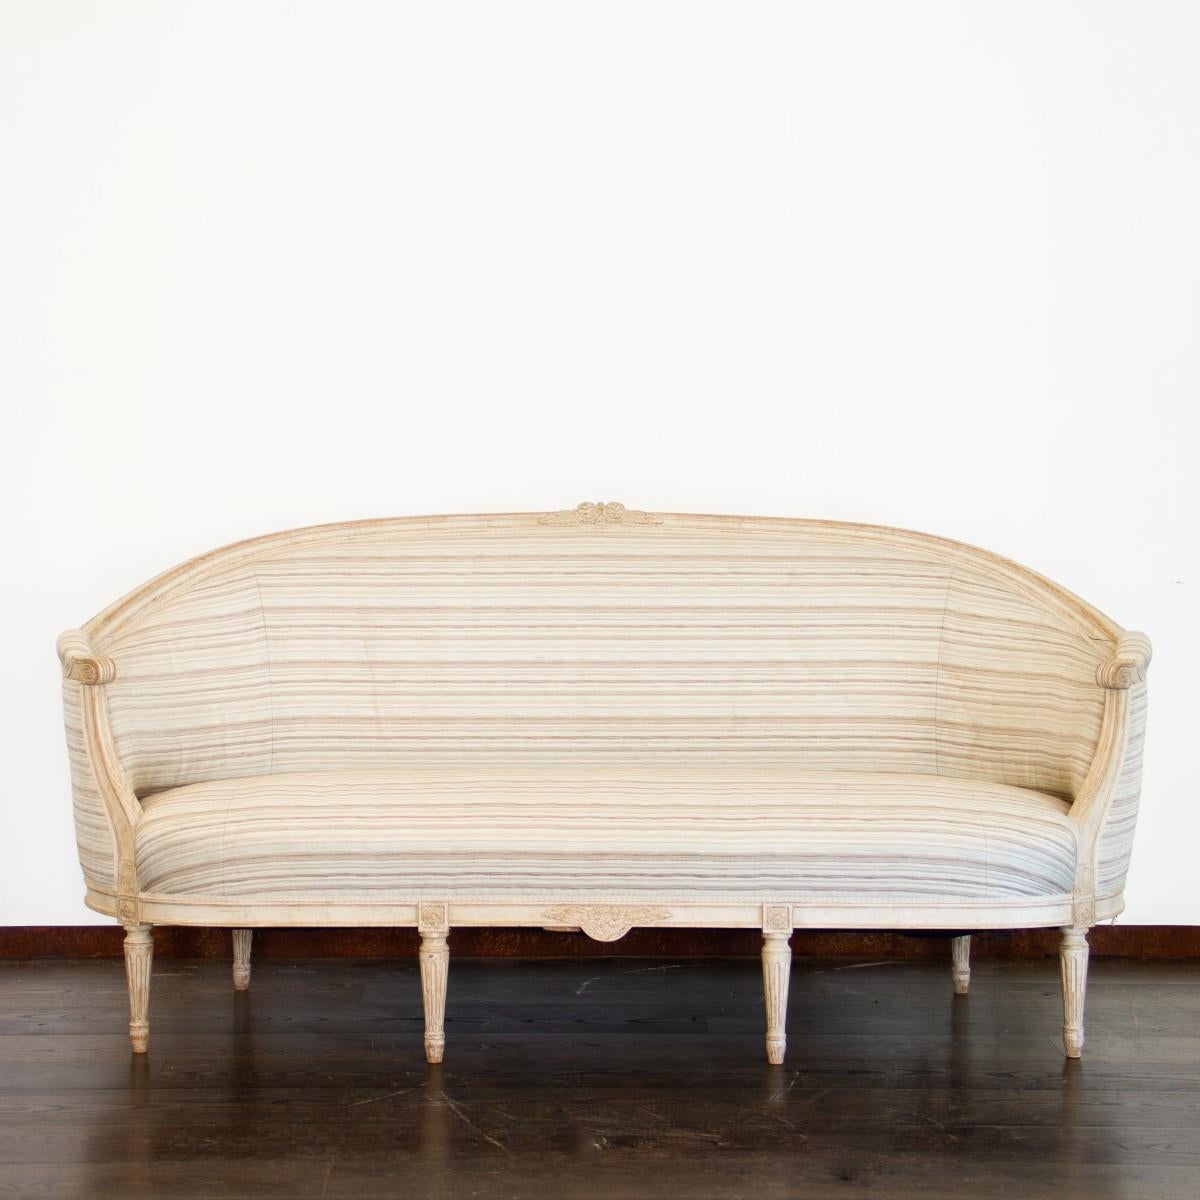 Late Gustavian Barrel-Back Upholstered Swedish Sofa from the Early 19th Century 3